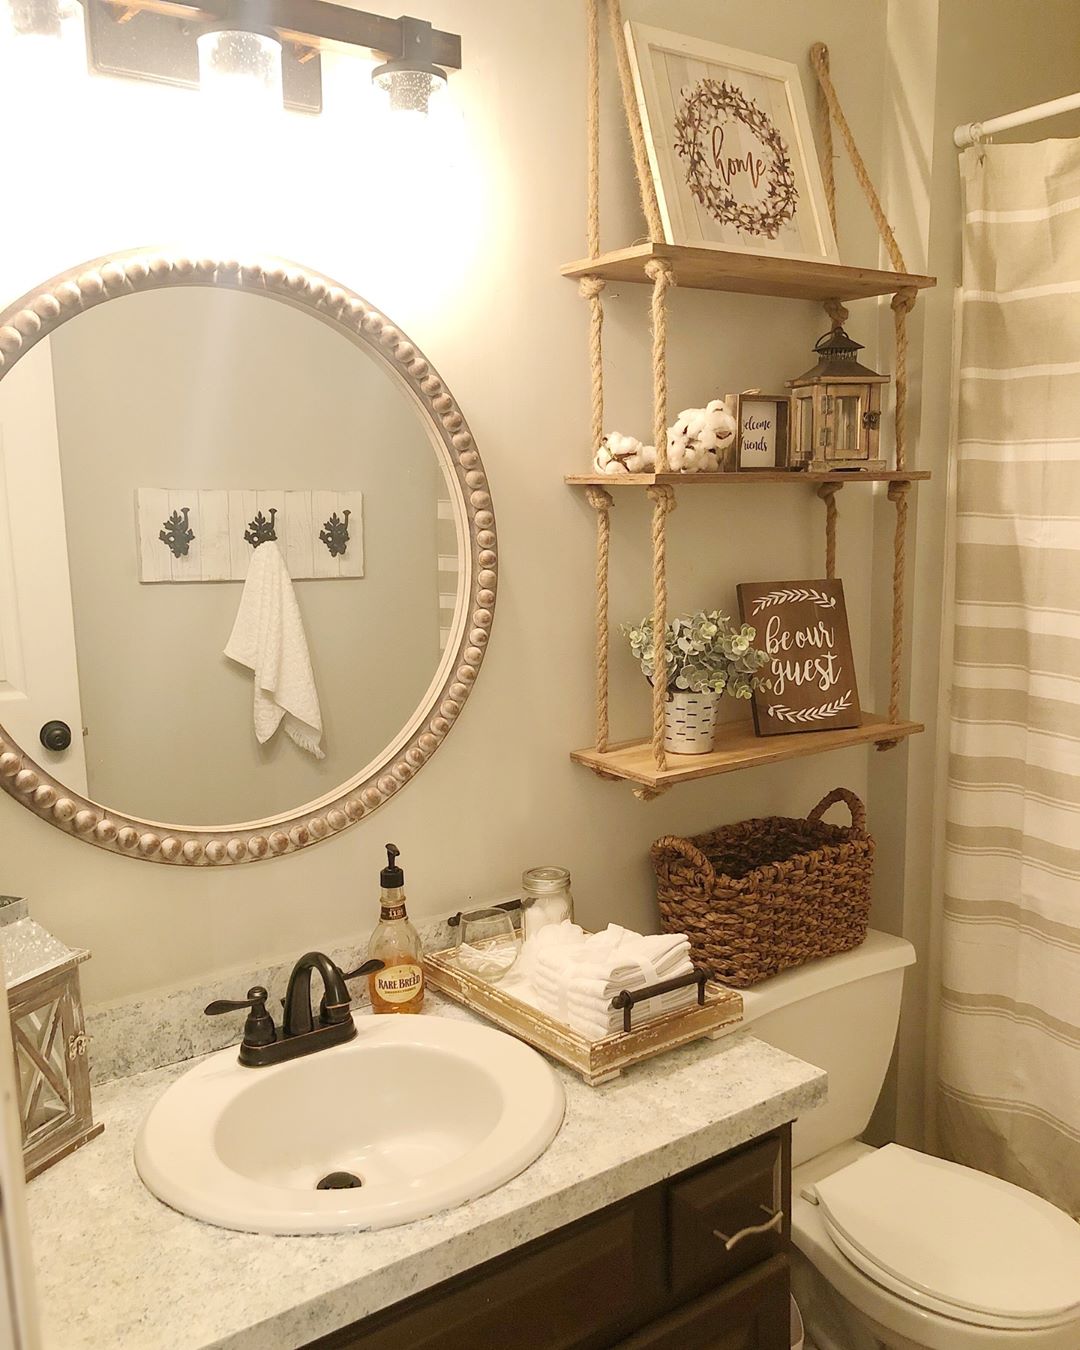 Bathroom with Hanging Shelves Above Toilet. Photo by Instagram user @interiors_by_danielle